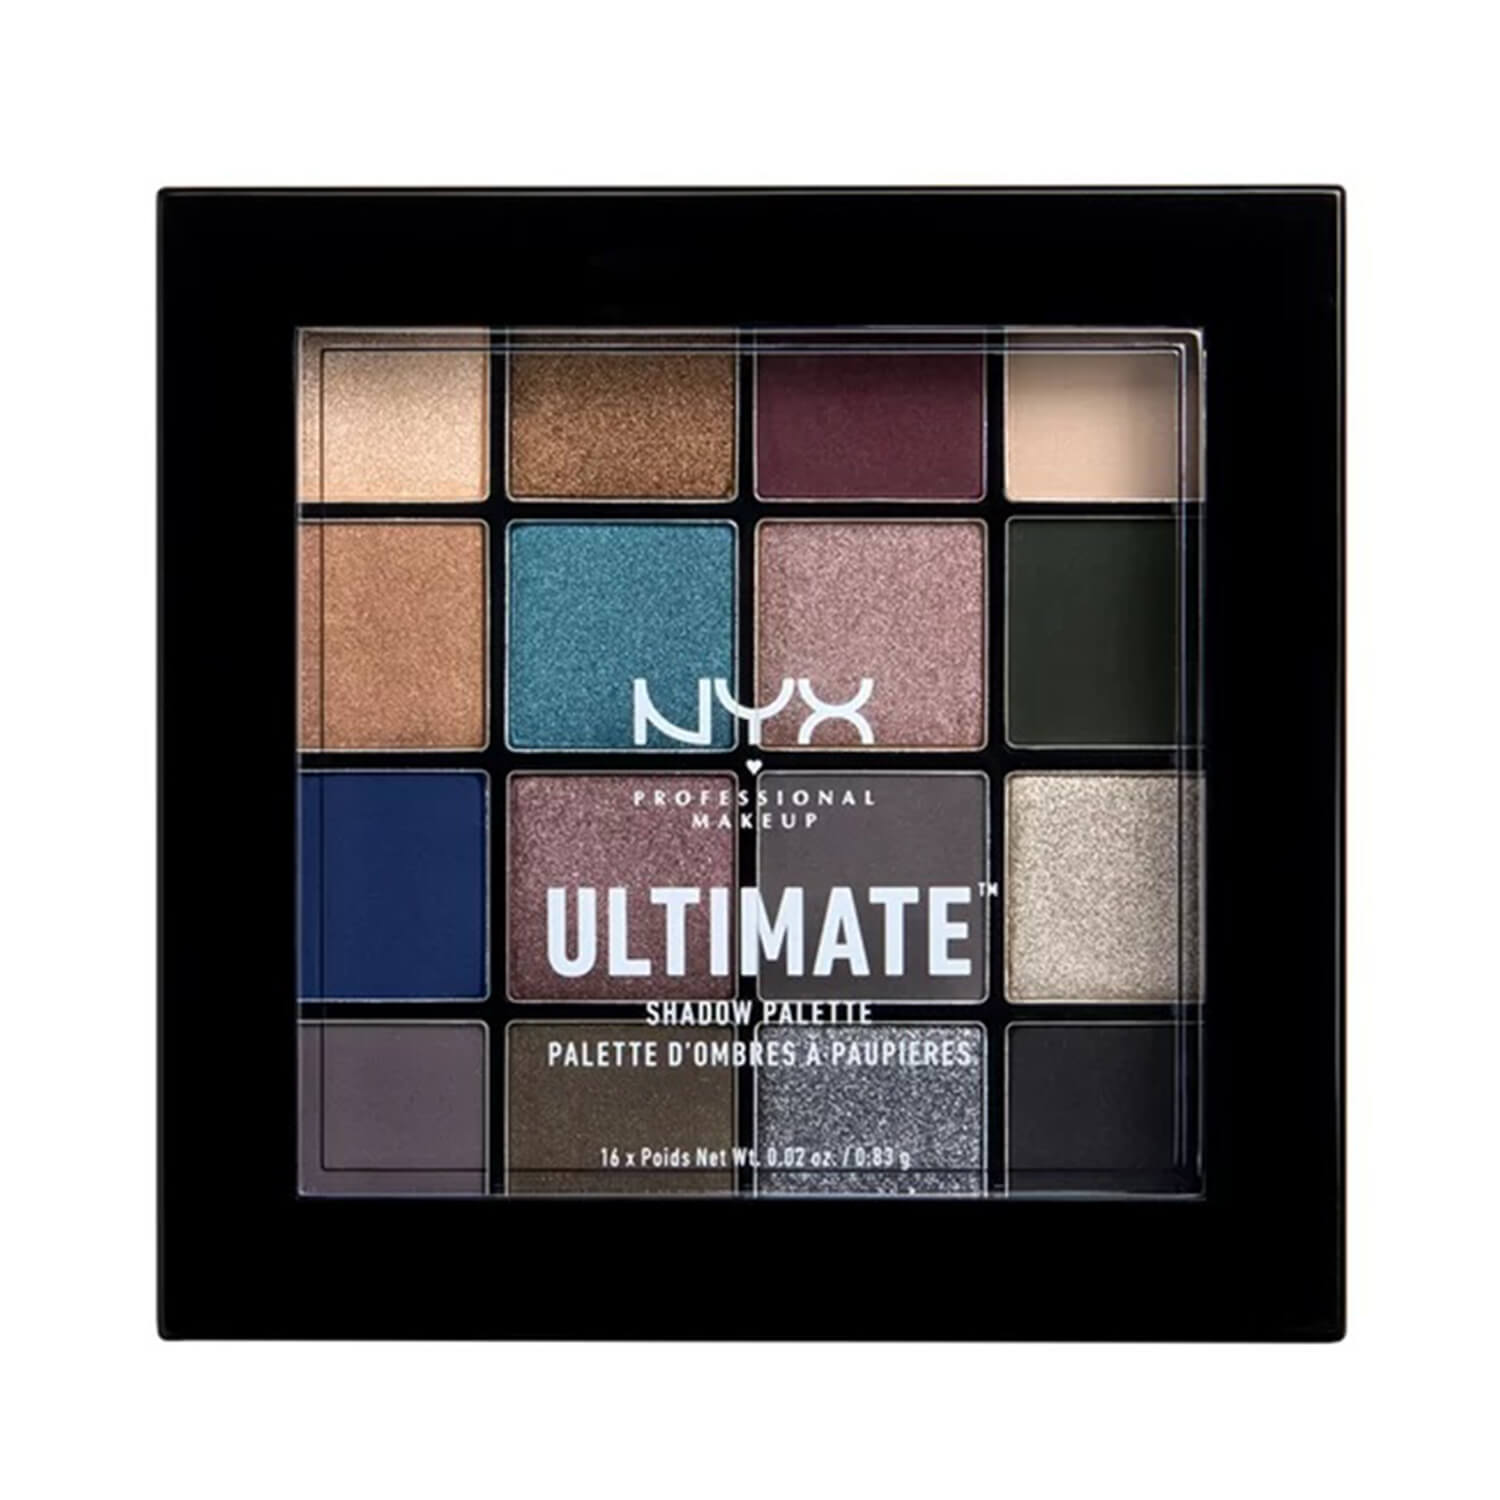 Shop NYX makeup eyeshadow palette in ash shade available at Heygirl.pk for delivery in Pakistan